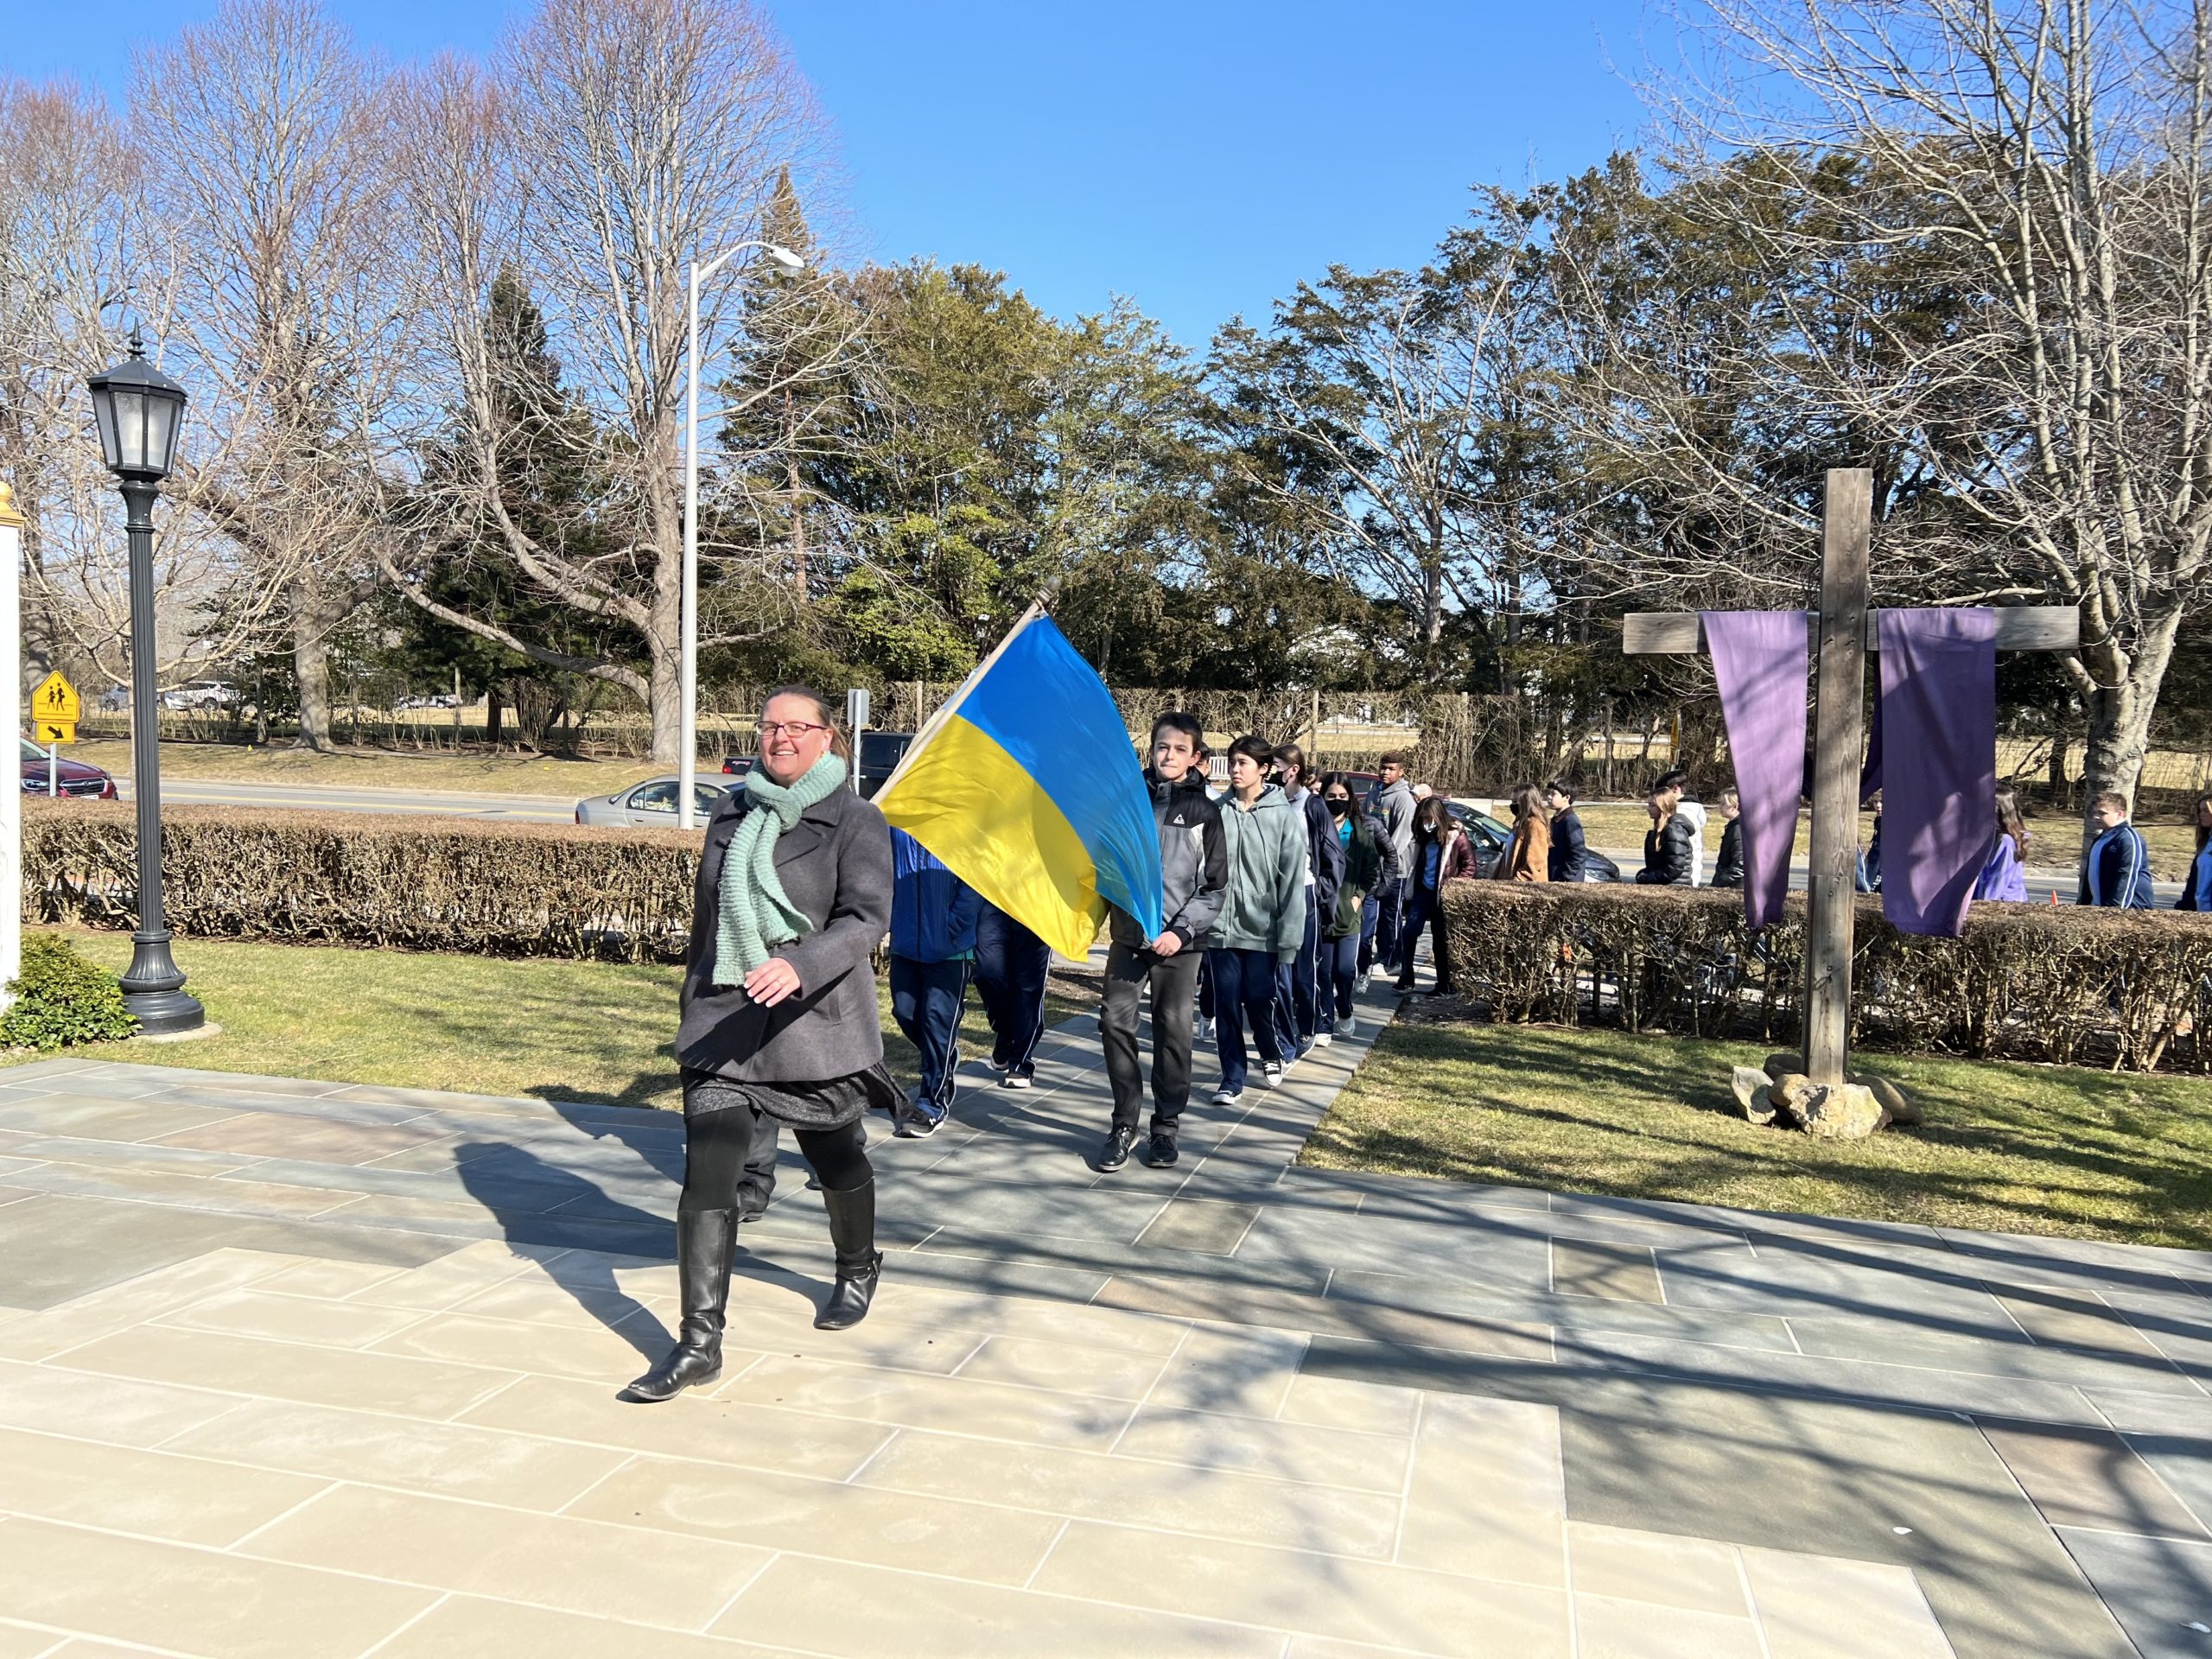 Our Lady of the Hamptons School Prep students participated in a peace procession in support of the people of Ukraine, marching to the Basilica on Ash Wednesday.